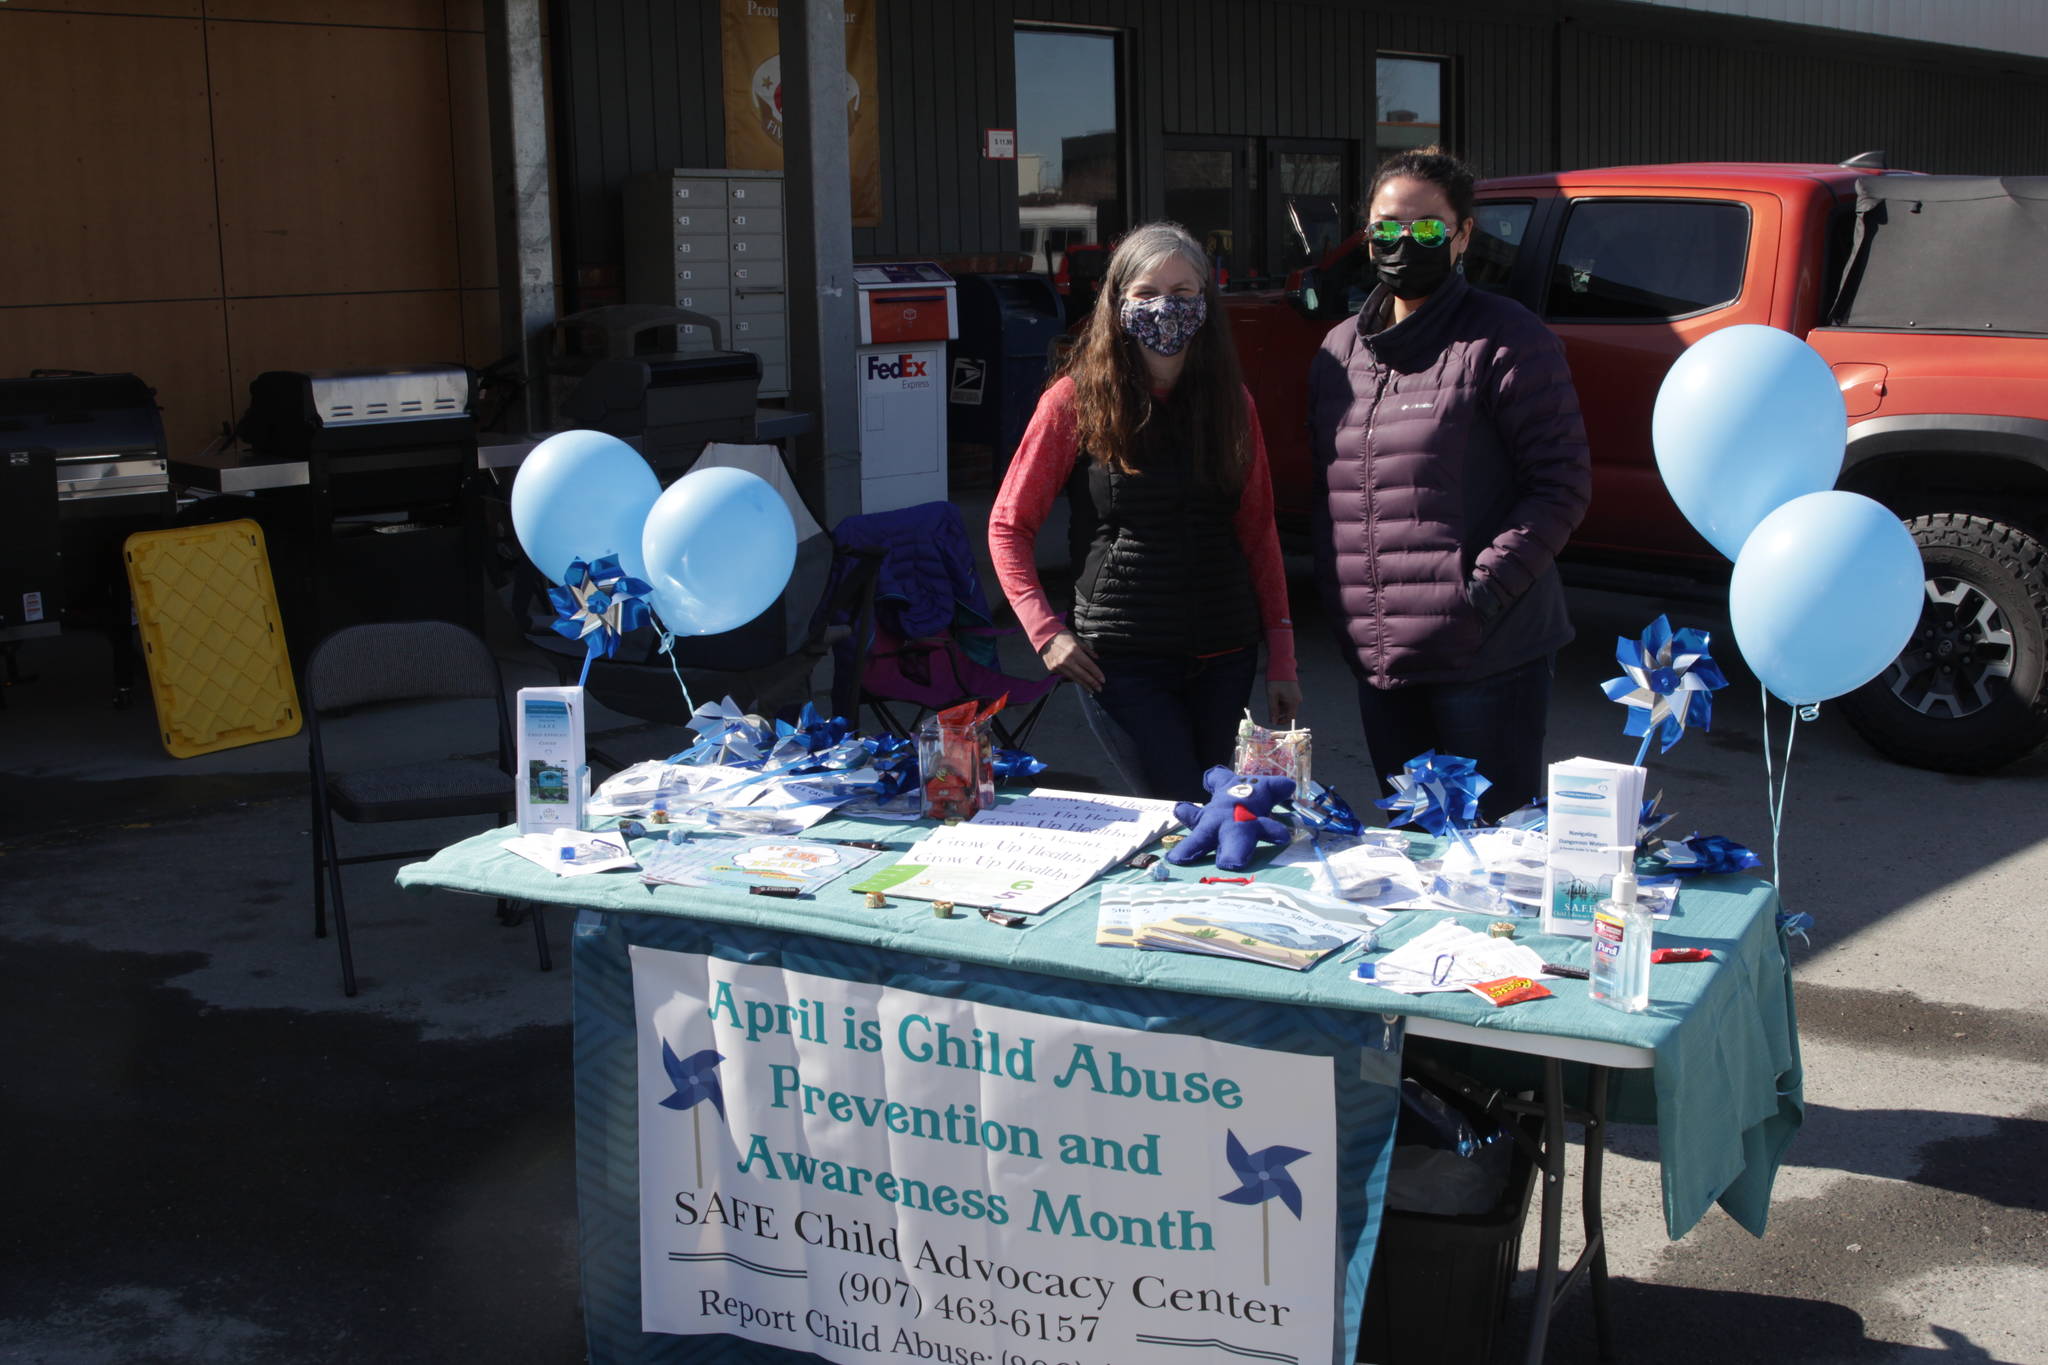 Susan Moseby, left, SAFE program administrator, and Jenny Farley, a nurse with the child advocacy center, man a table at IGA Foodland for Child Abuse Prevention Awareness month, giving information and resources to those who ask on April 16, 2021. (Michael S. Lockett / Juneau Empire)